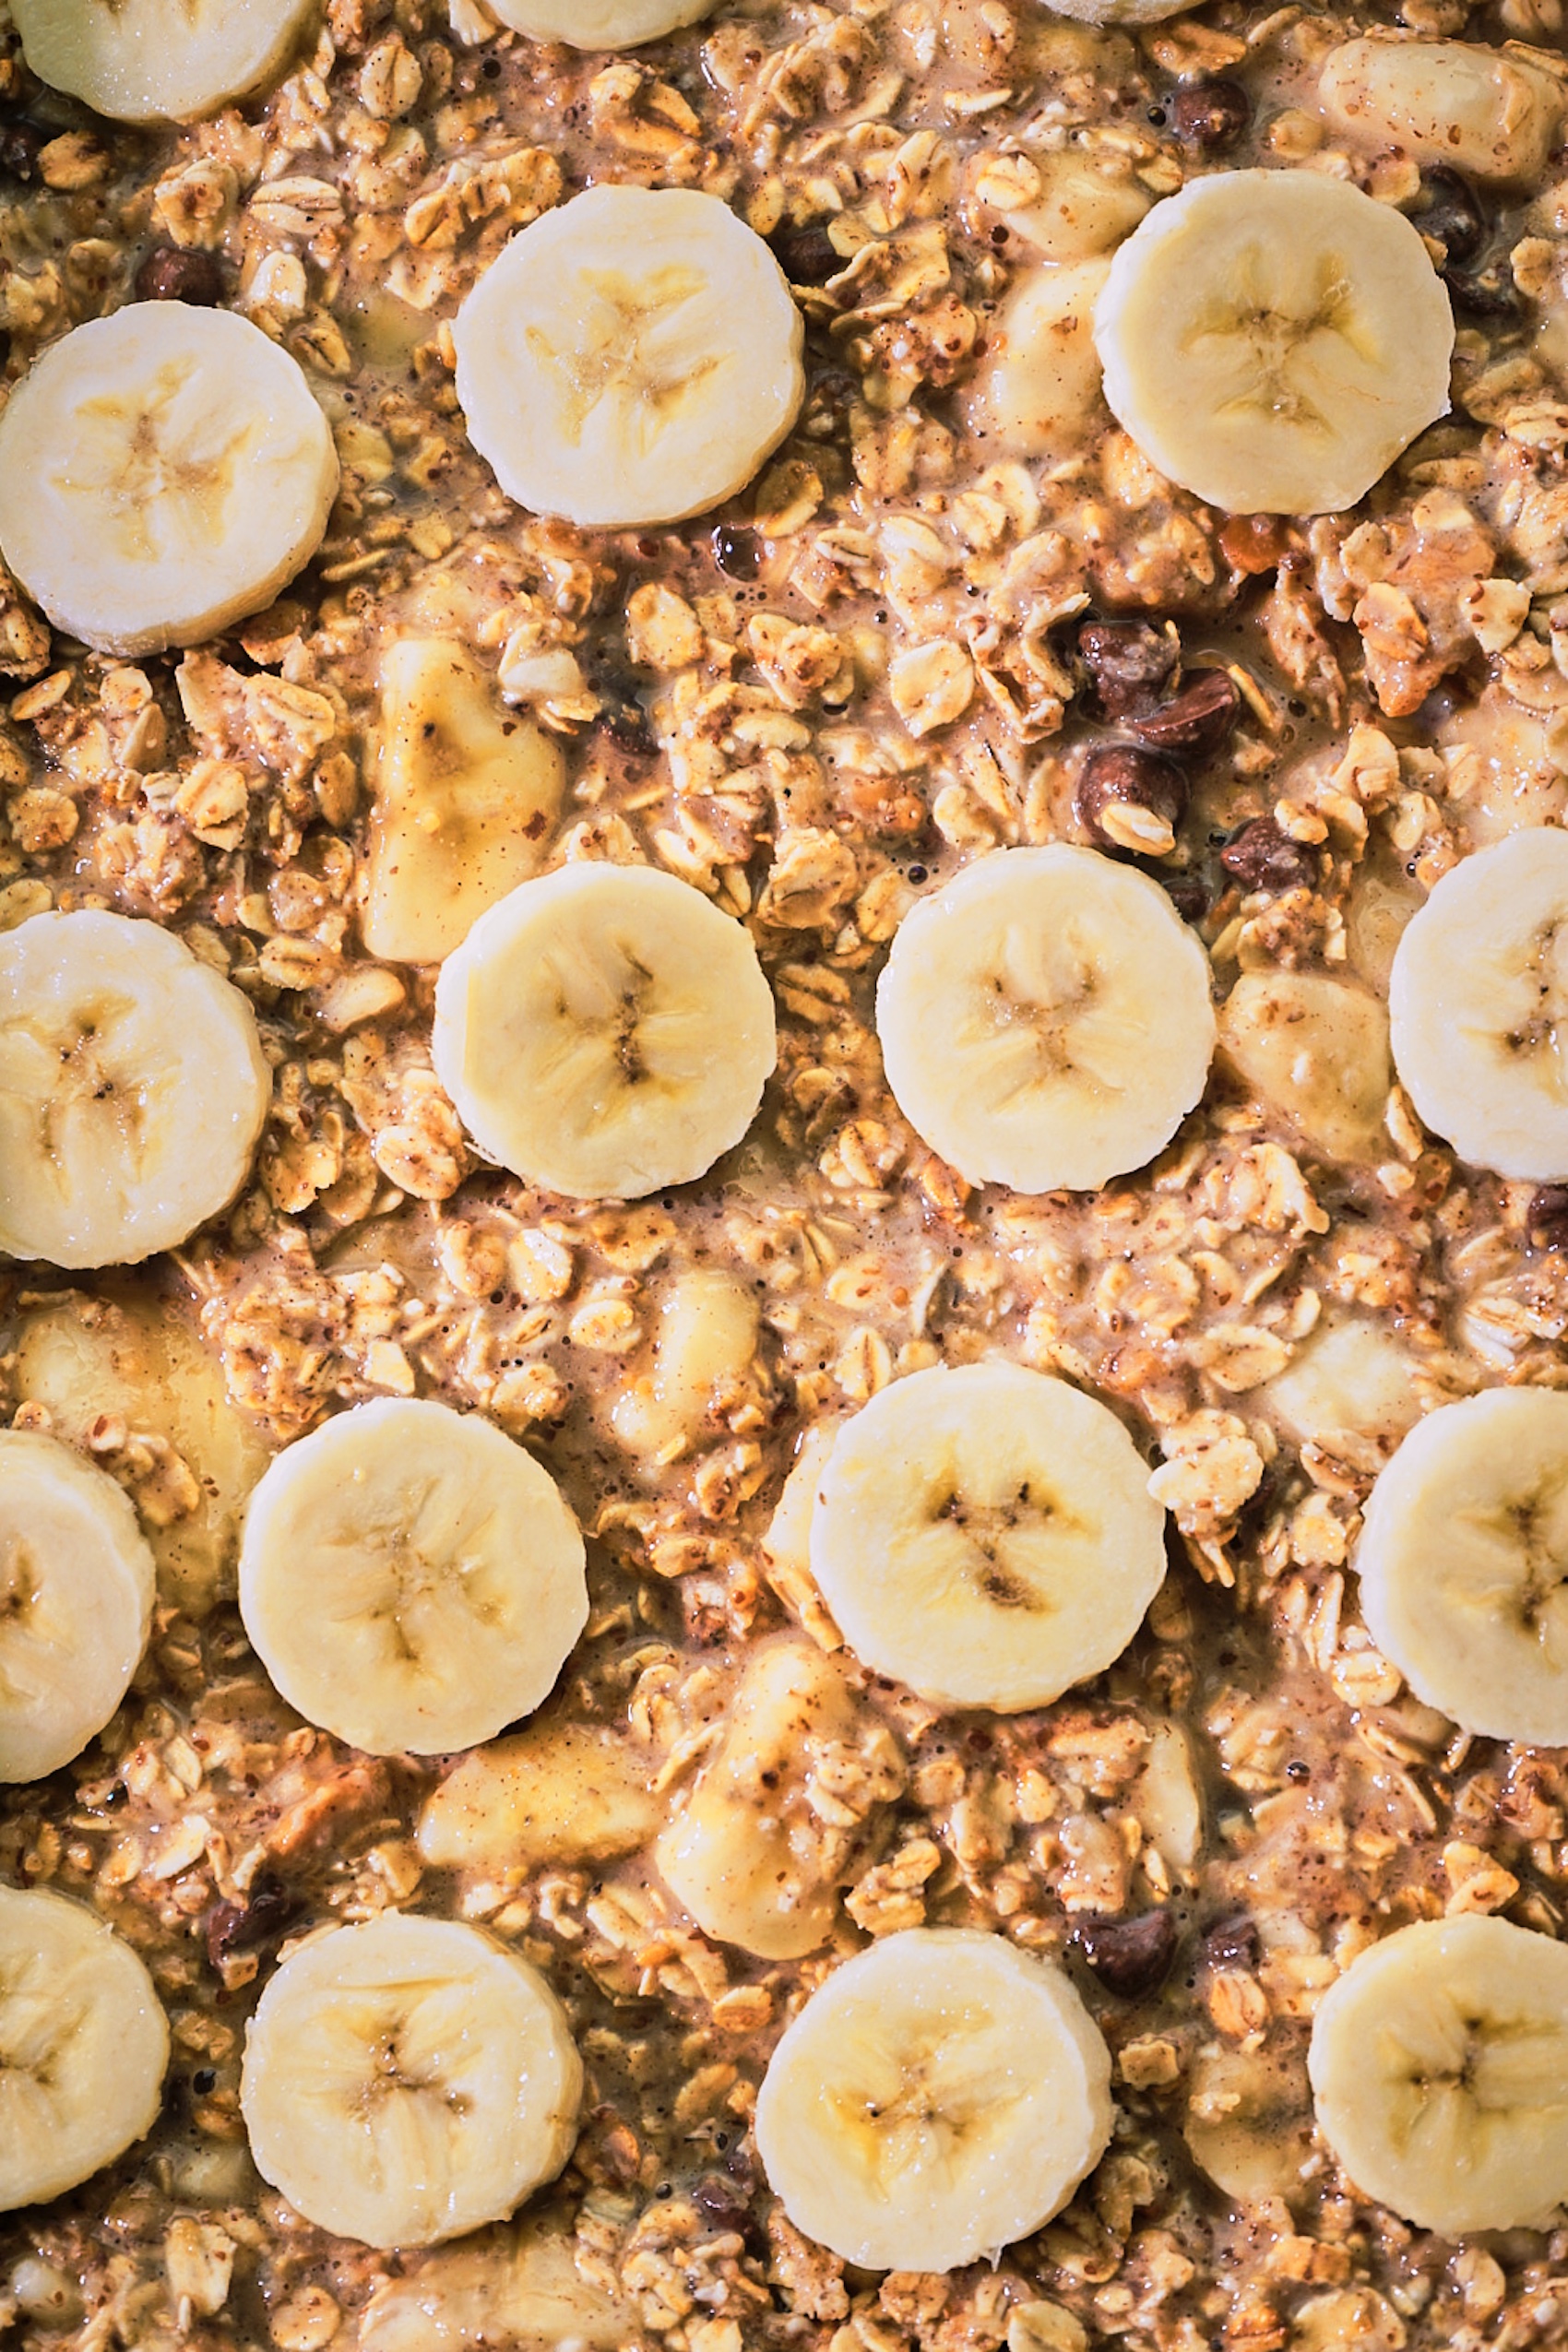 sliced bananas arranged on top of a dish of baked oatmeal